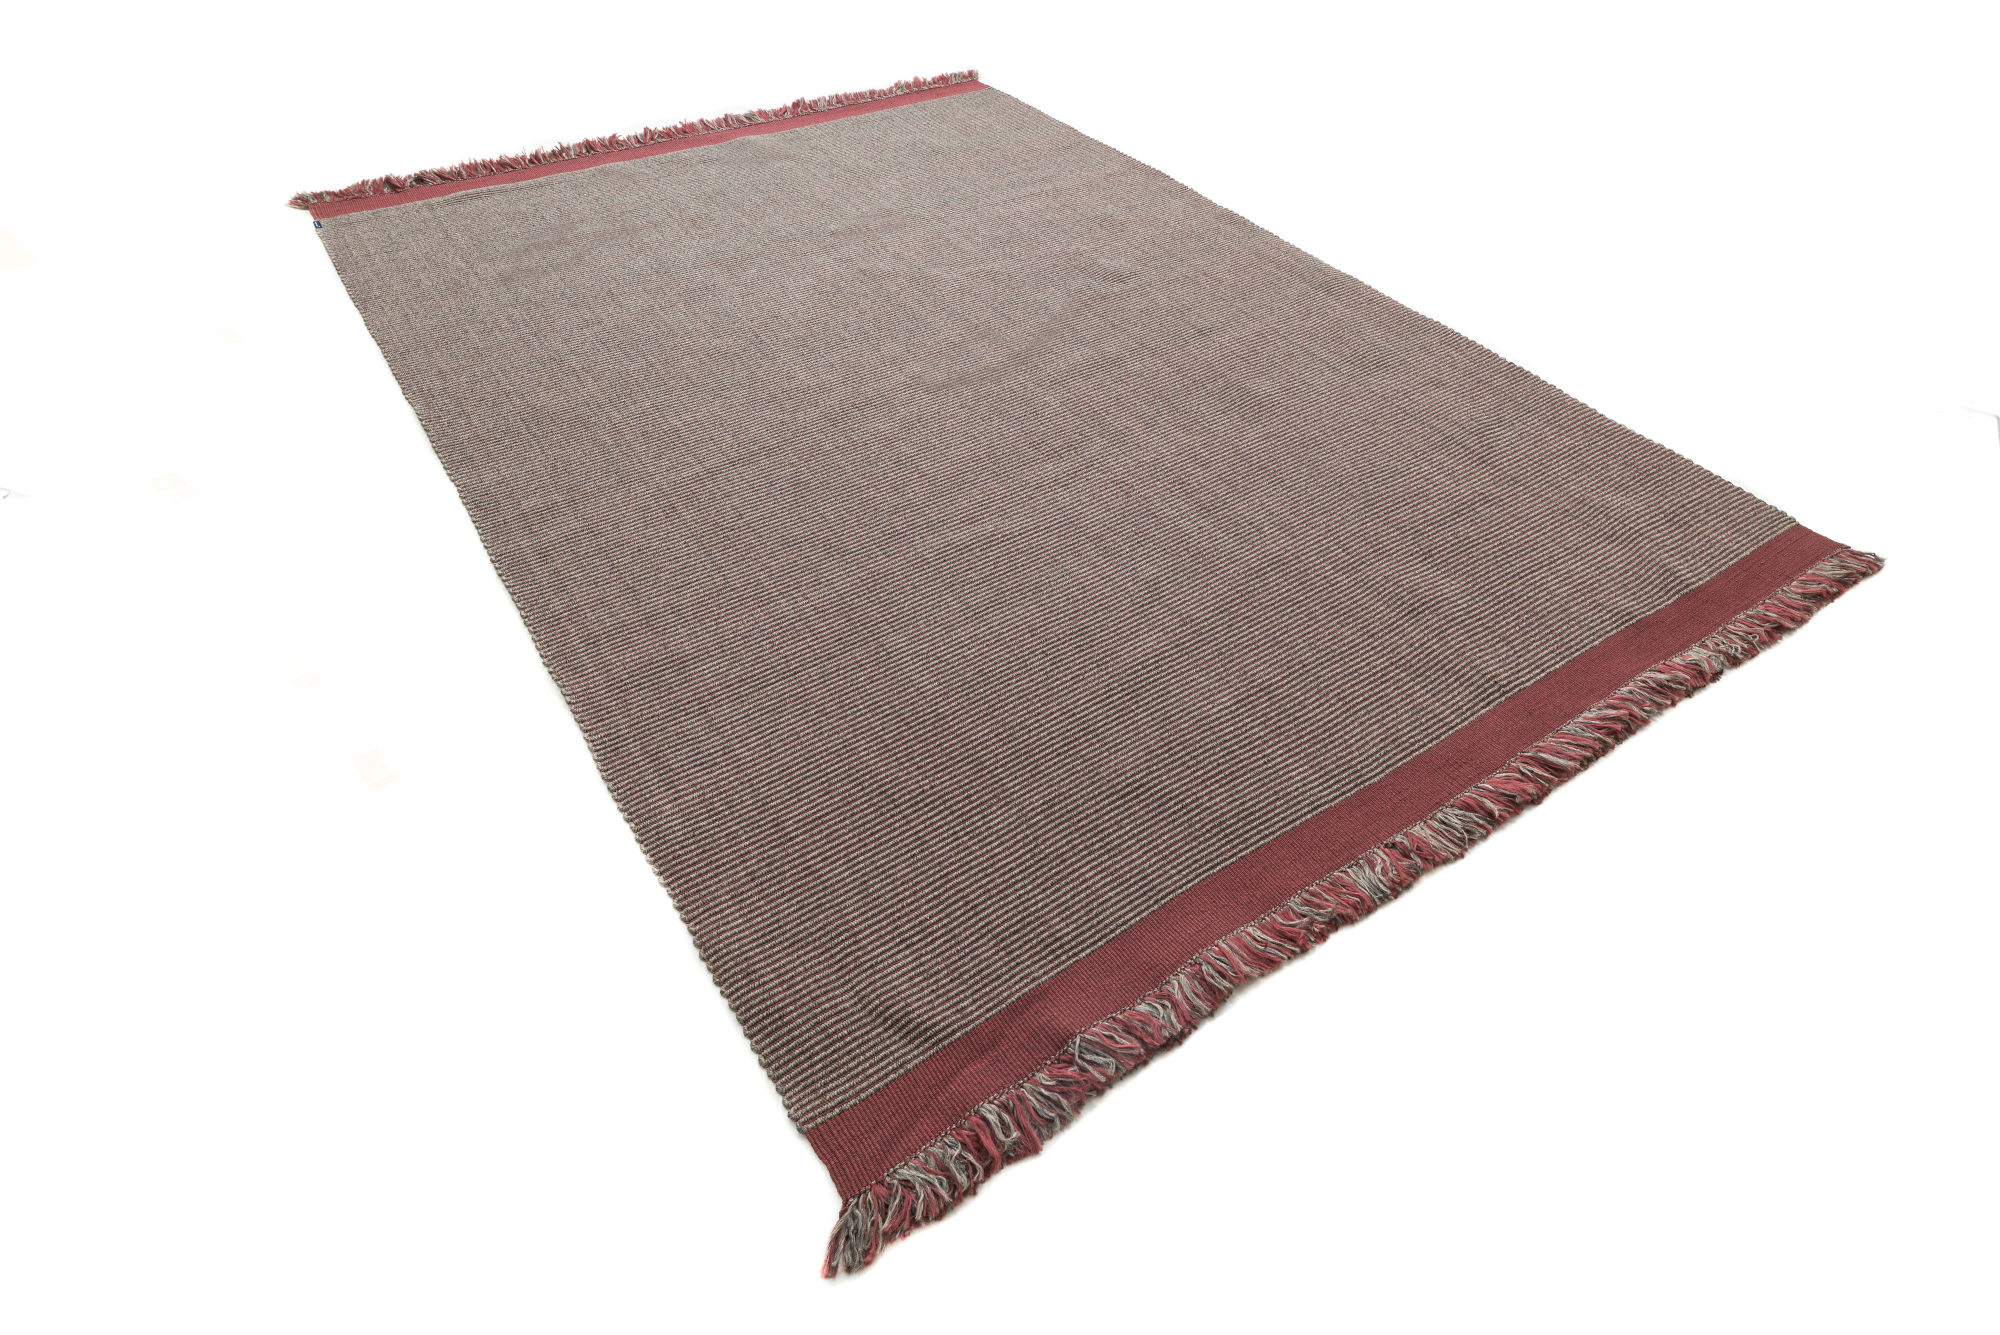 SUPERFLAT_terracotta red brown handwoven outdoor rug with fringes